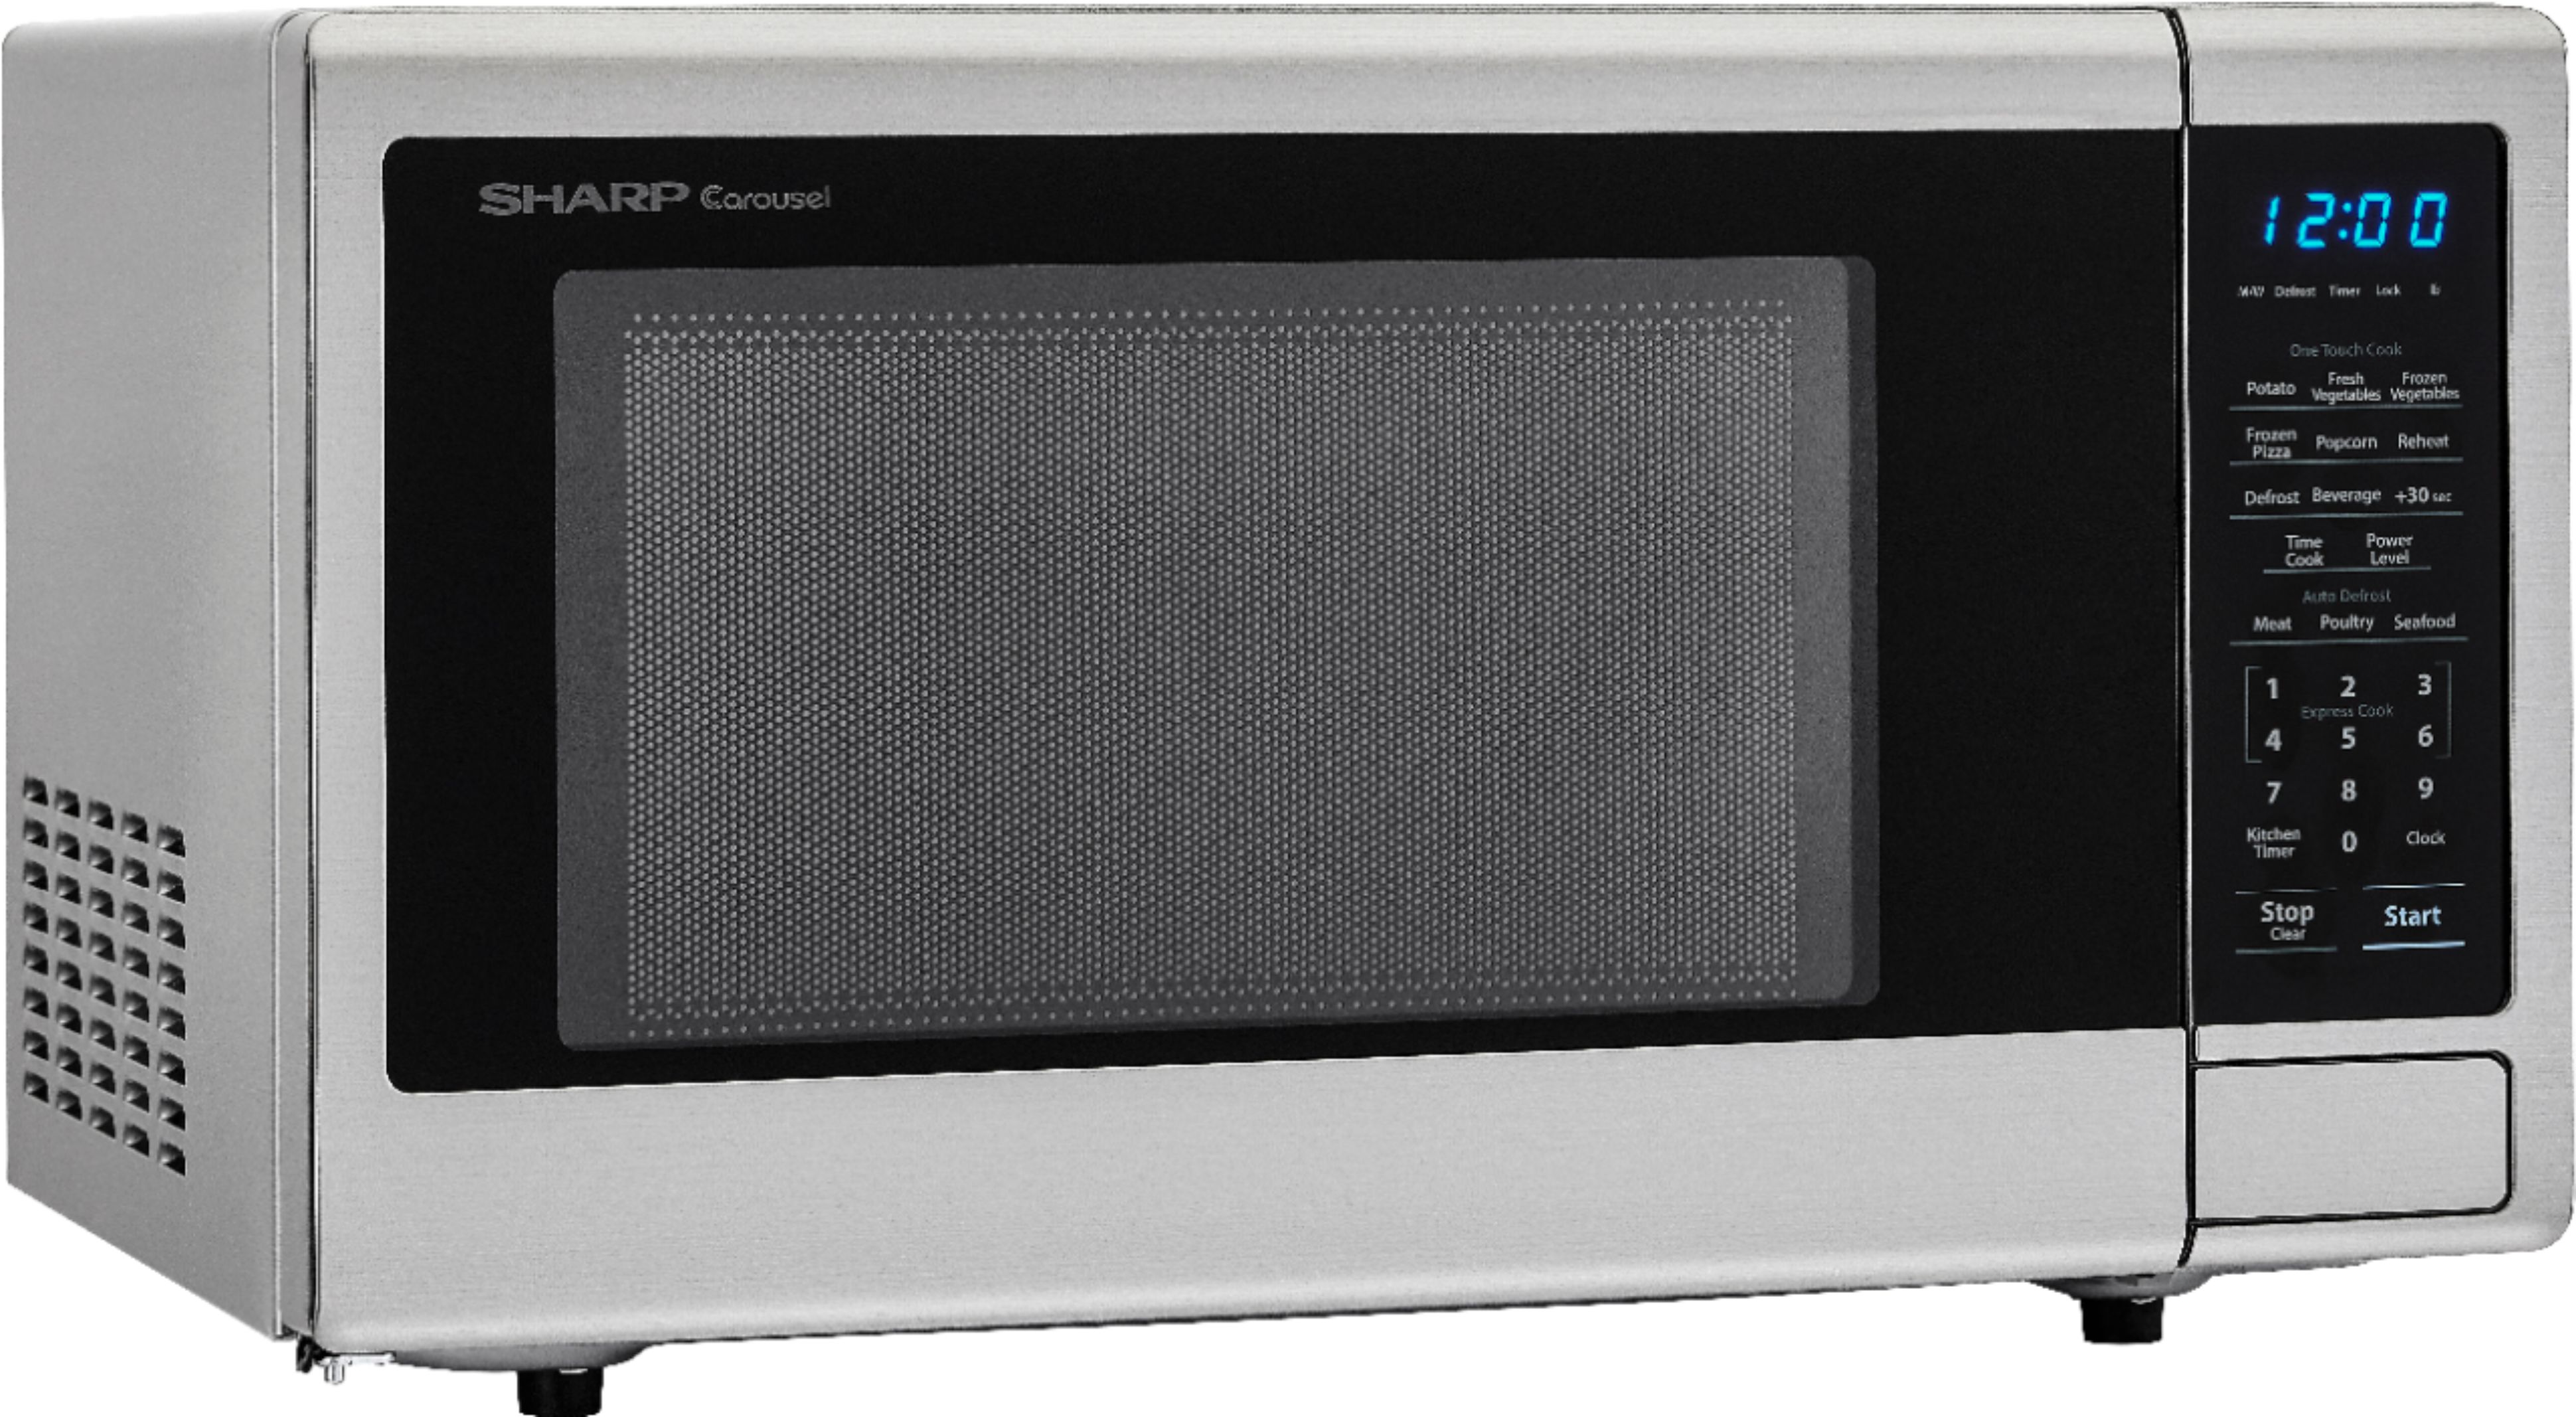 Angle View: GE Profile - 2.2 Cu. Ft. Microwave - Stainless steel